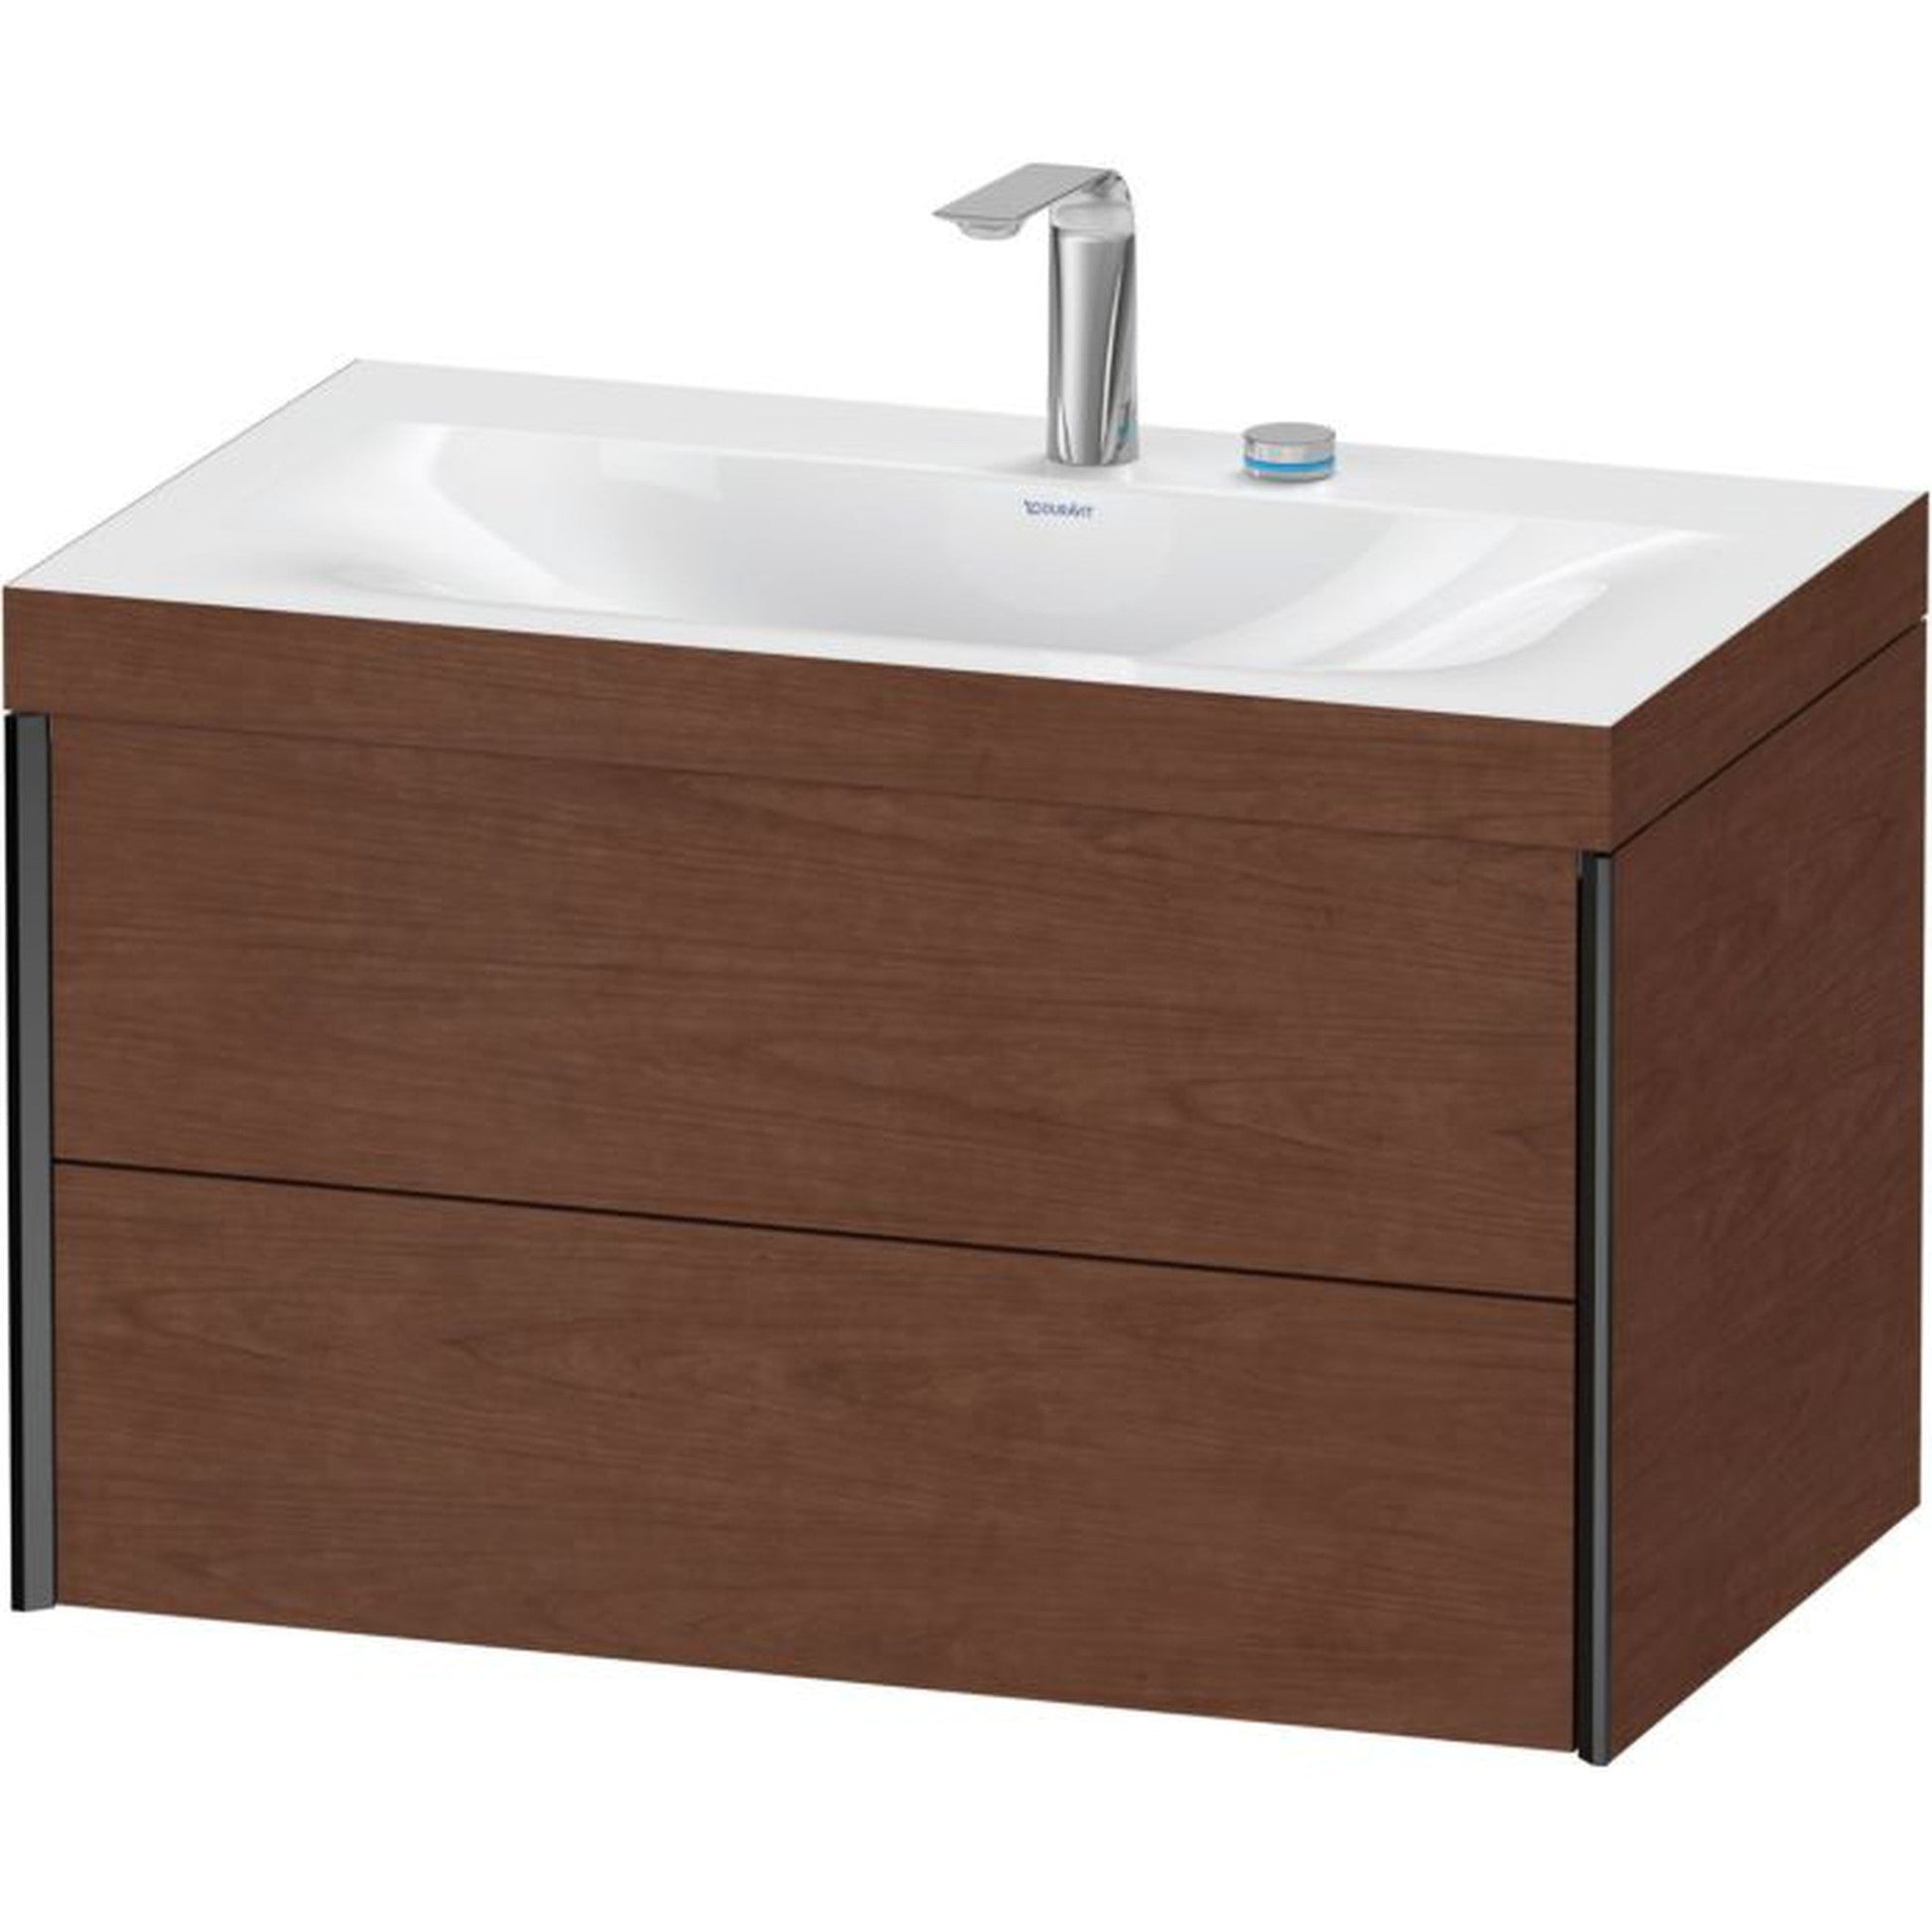 Duravit Xviu 31" x 20" x 19" Two Drawer C-Bonded Wall-Mount Vanity Kit With Two Tap Holes, American Walnut (XV4615EB213C)